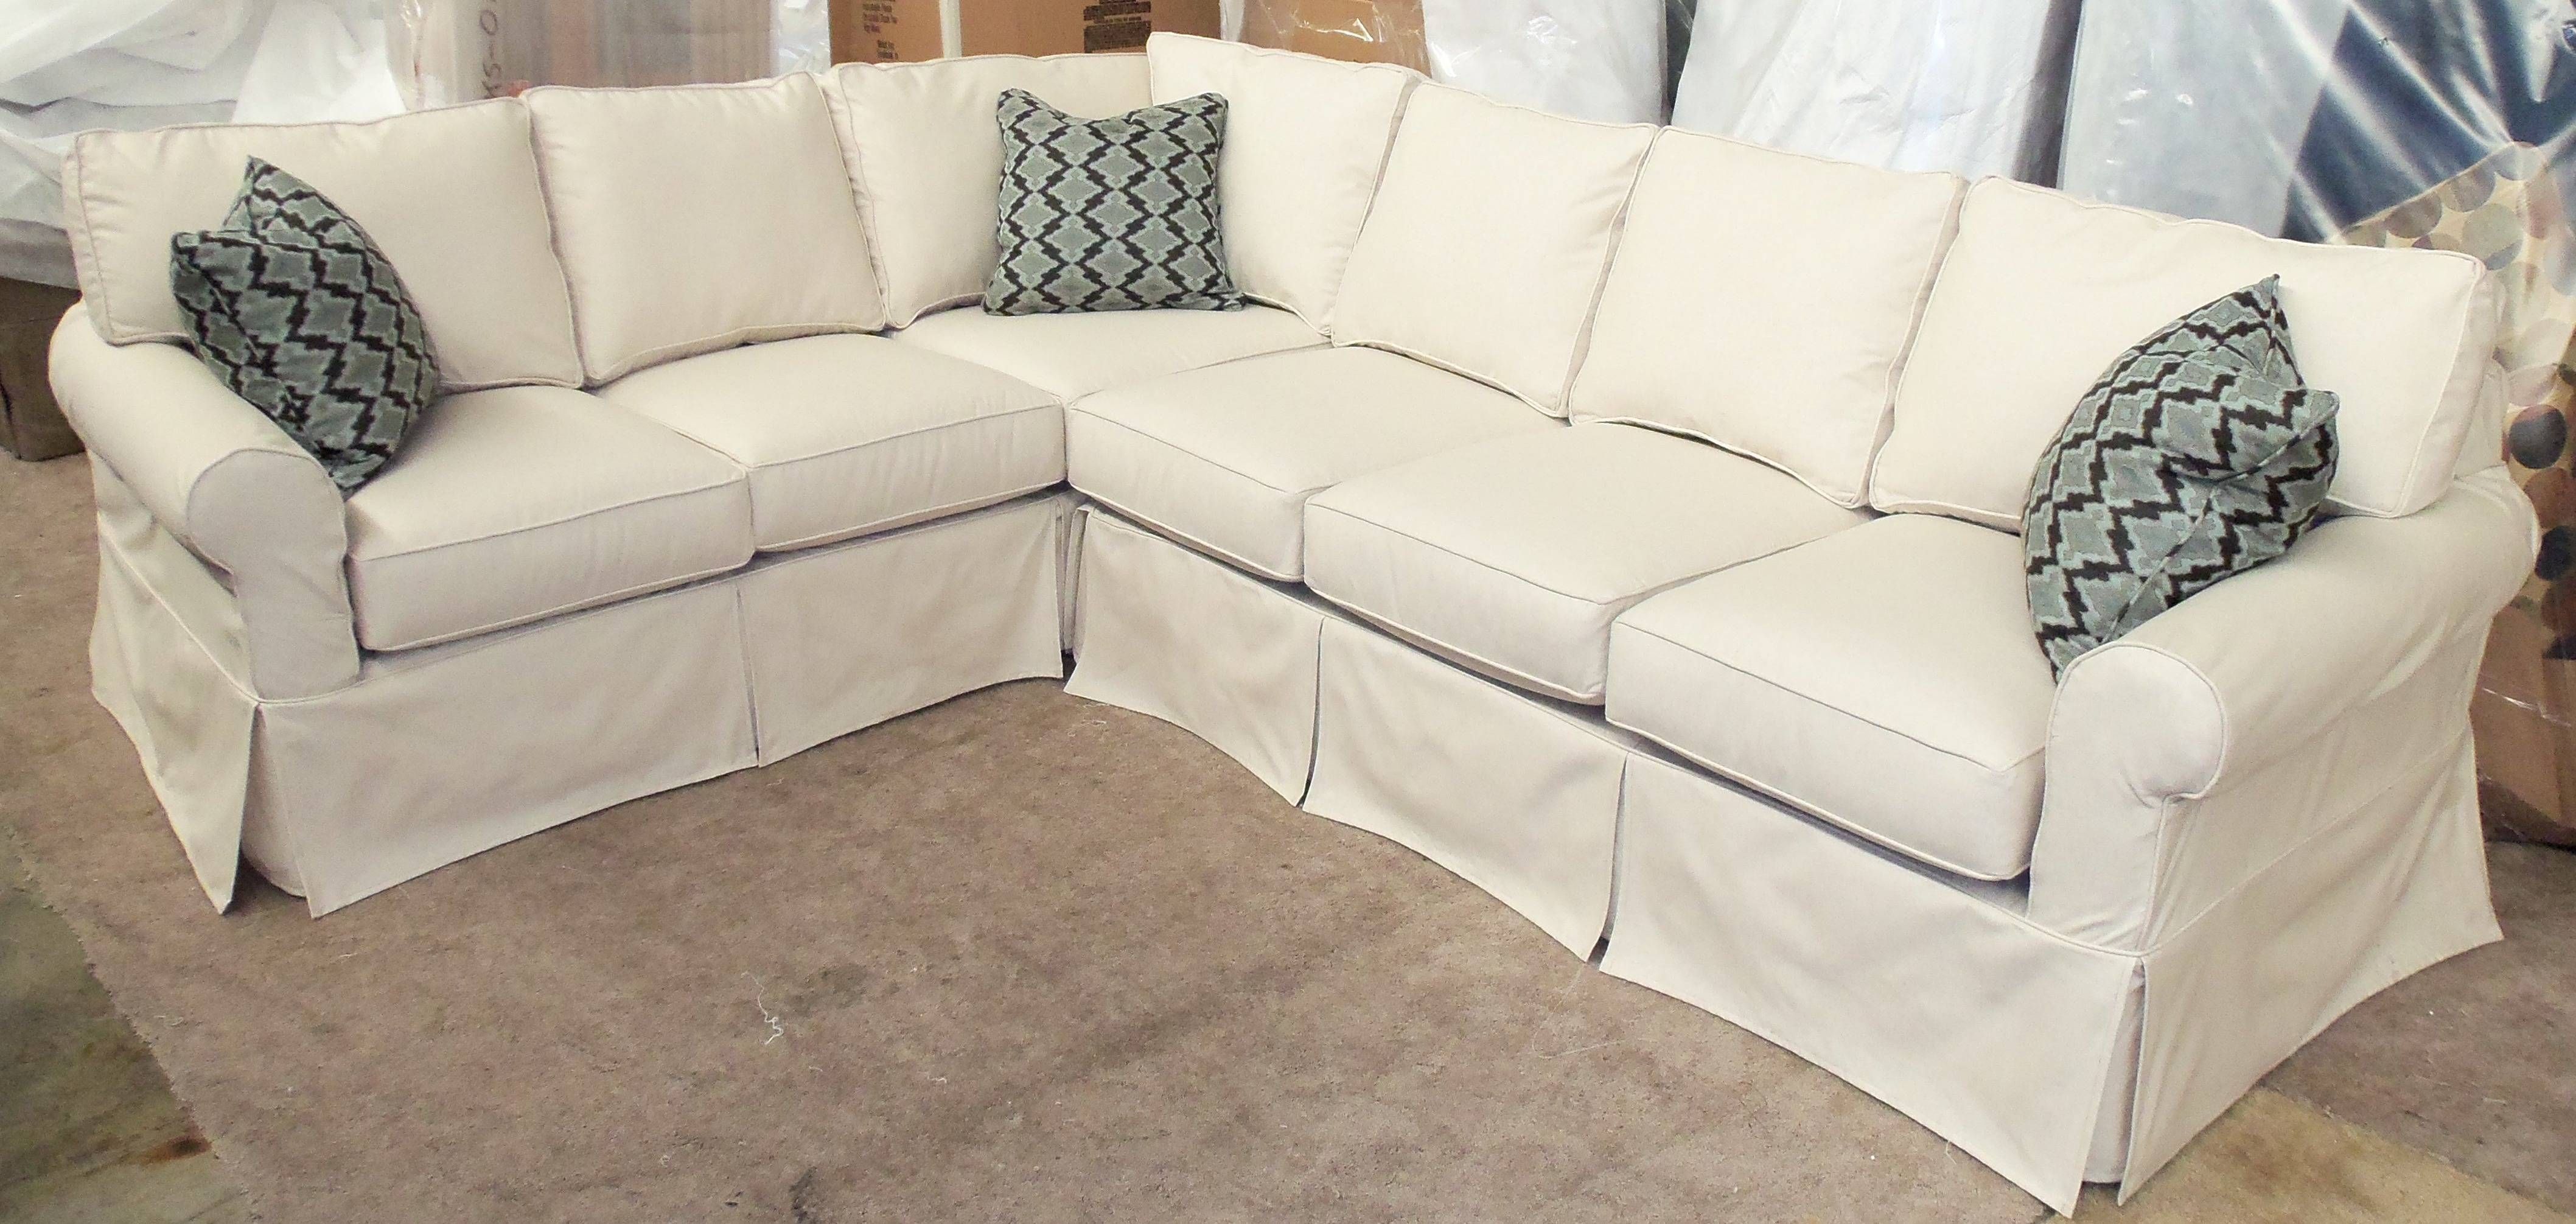 ▻ Sofa : 10 Lovely Sofa Covers For Sectionals Sectional Couch Within Sectional Sofa Covers (View 18 of 25)